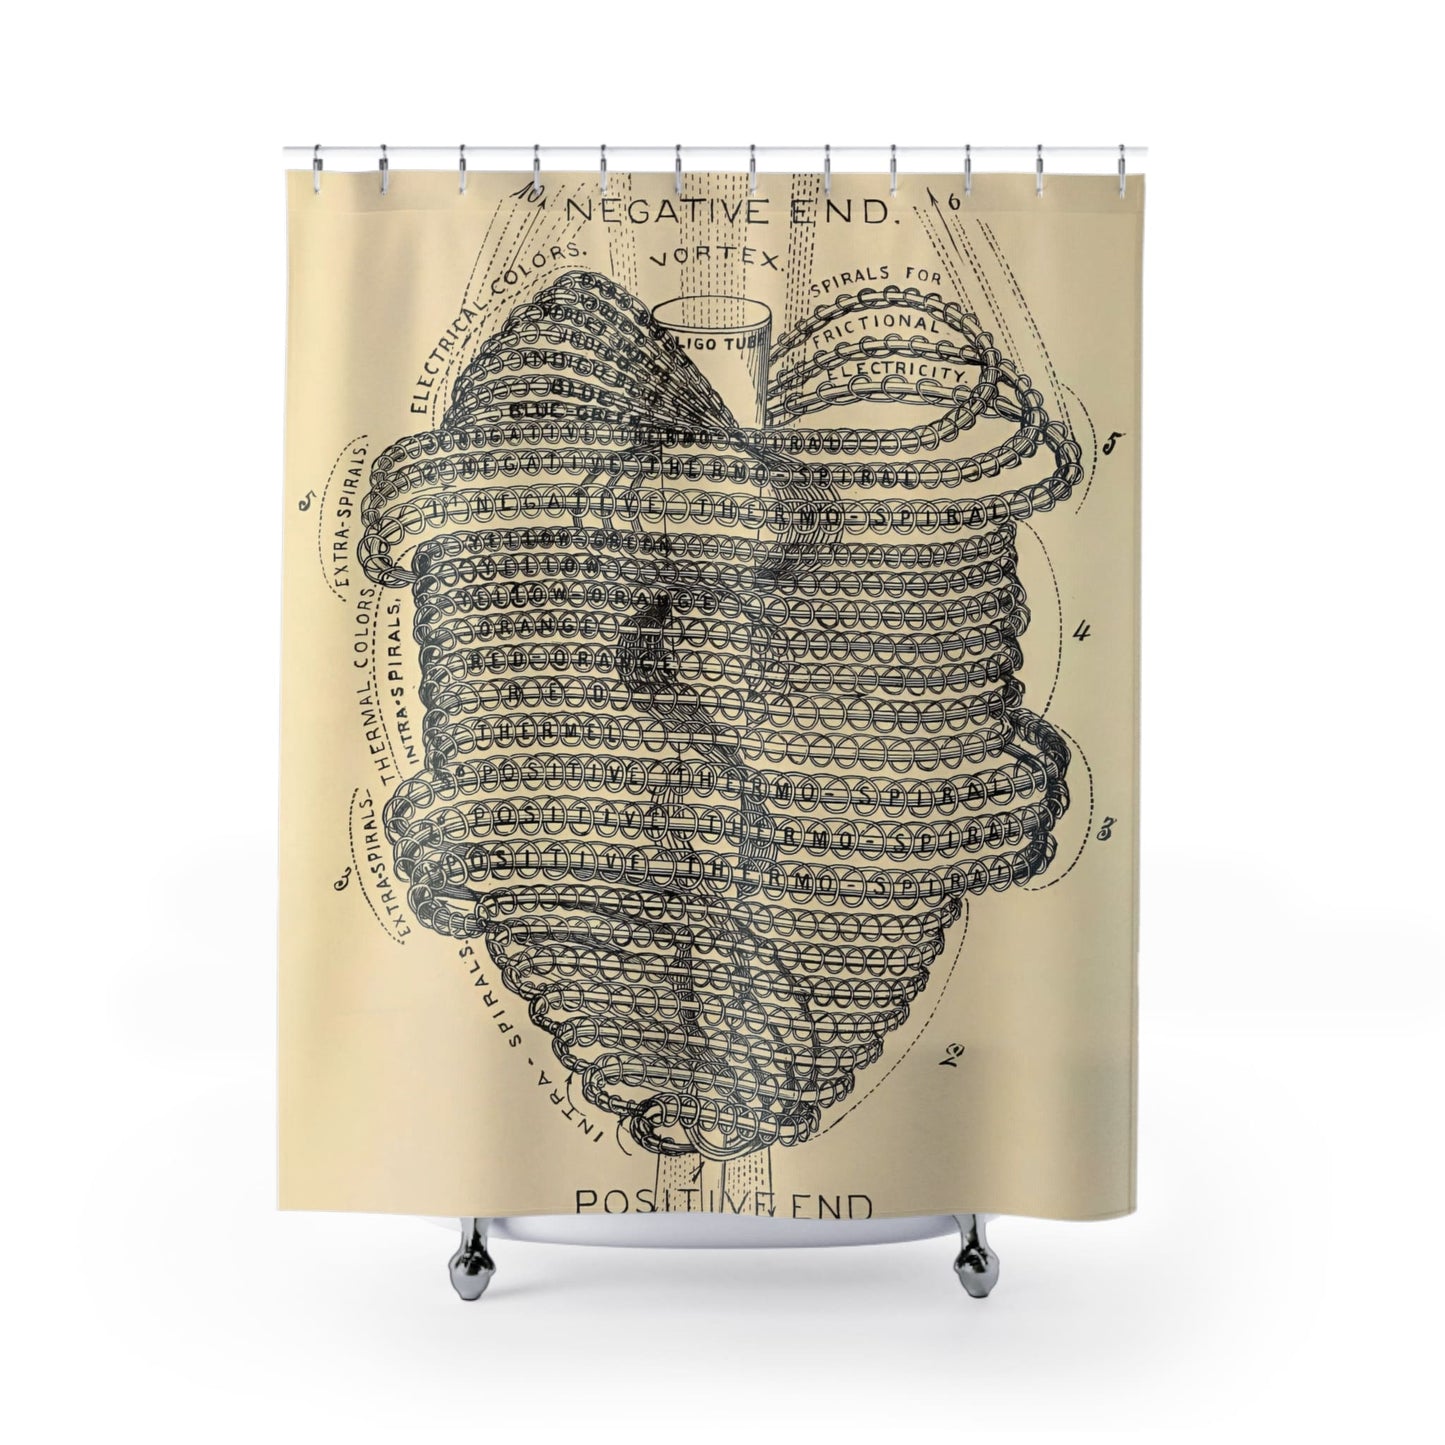 Cool Spiral Heart Shower Curtain with electricity design, energetic bathroom decor showcasing electrifying spiral hearts.